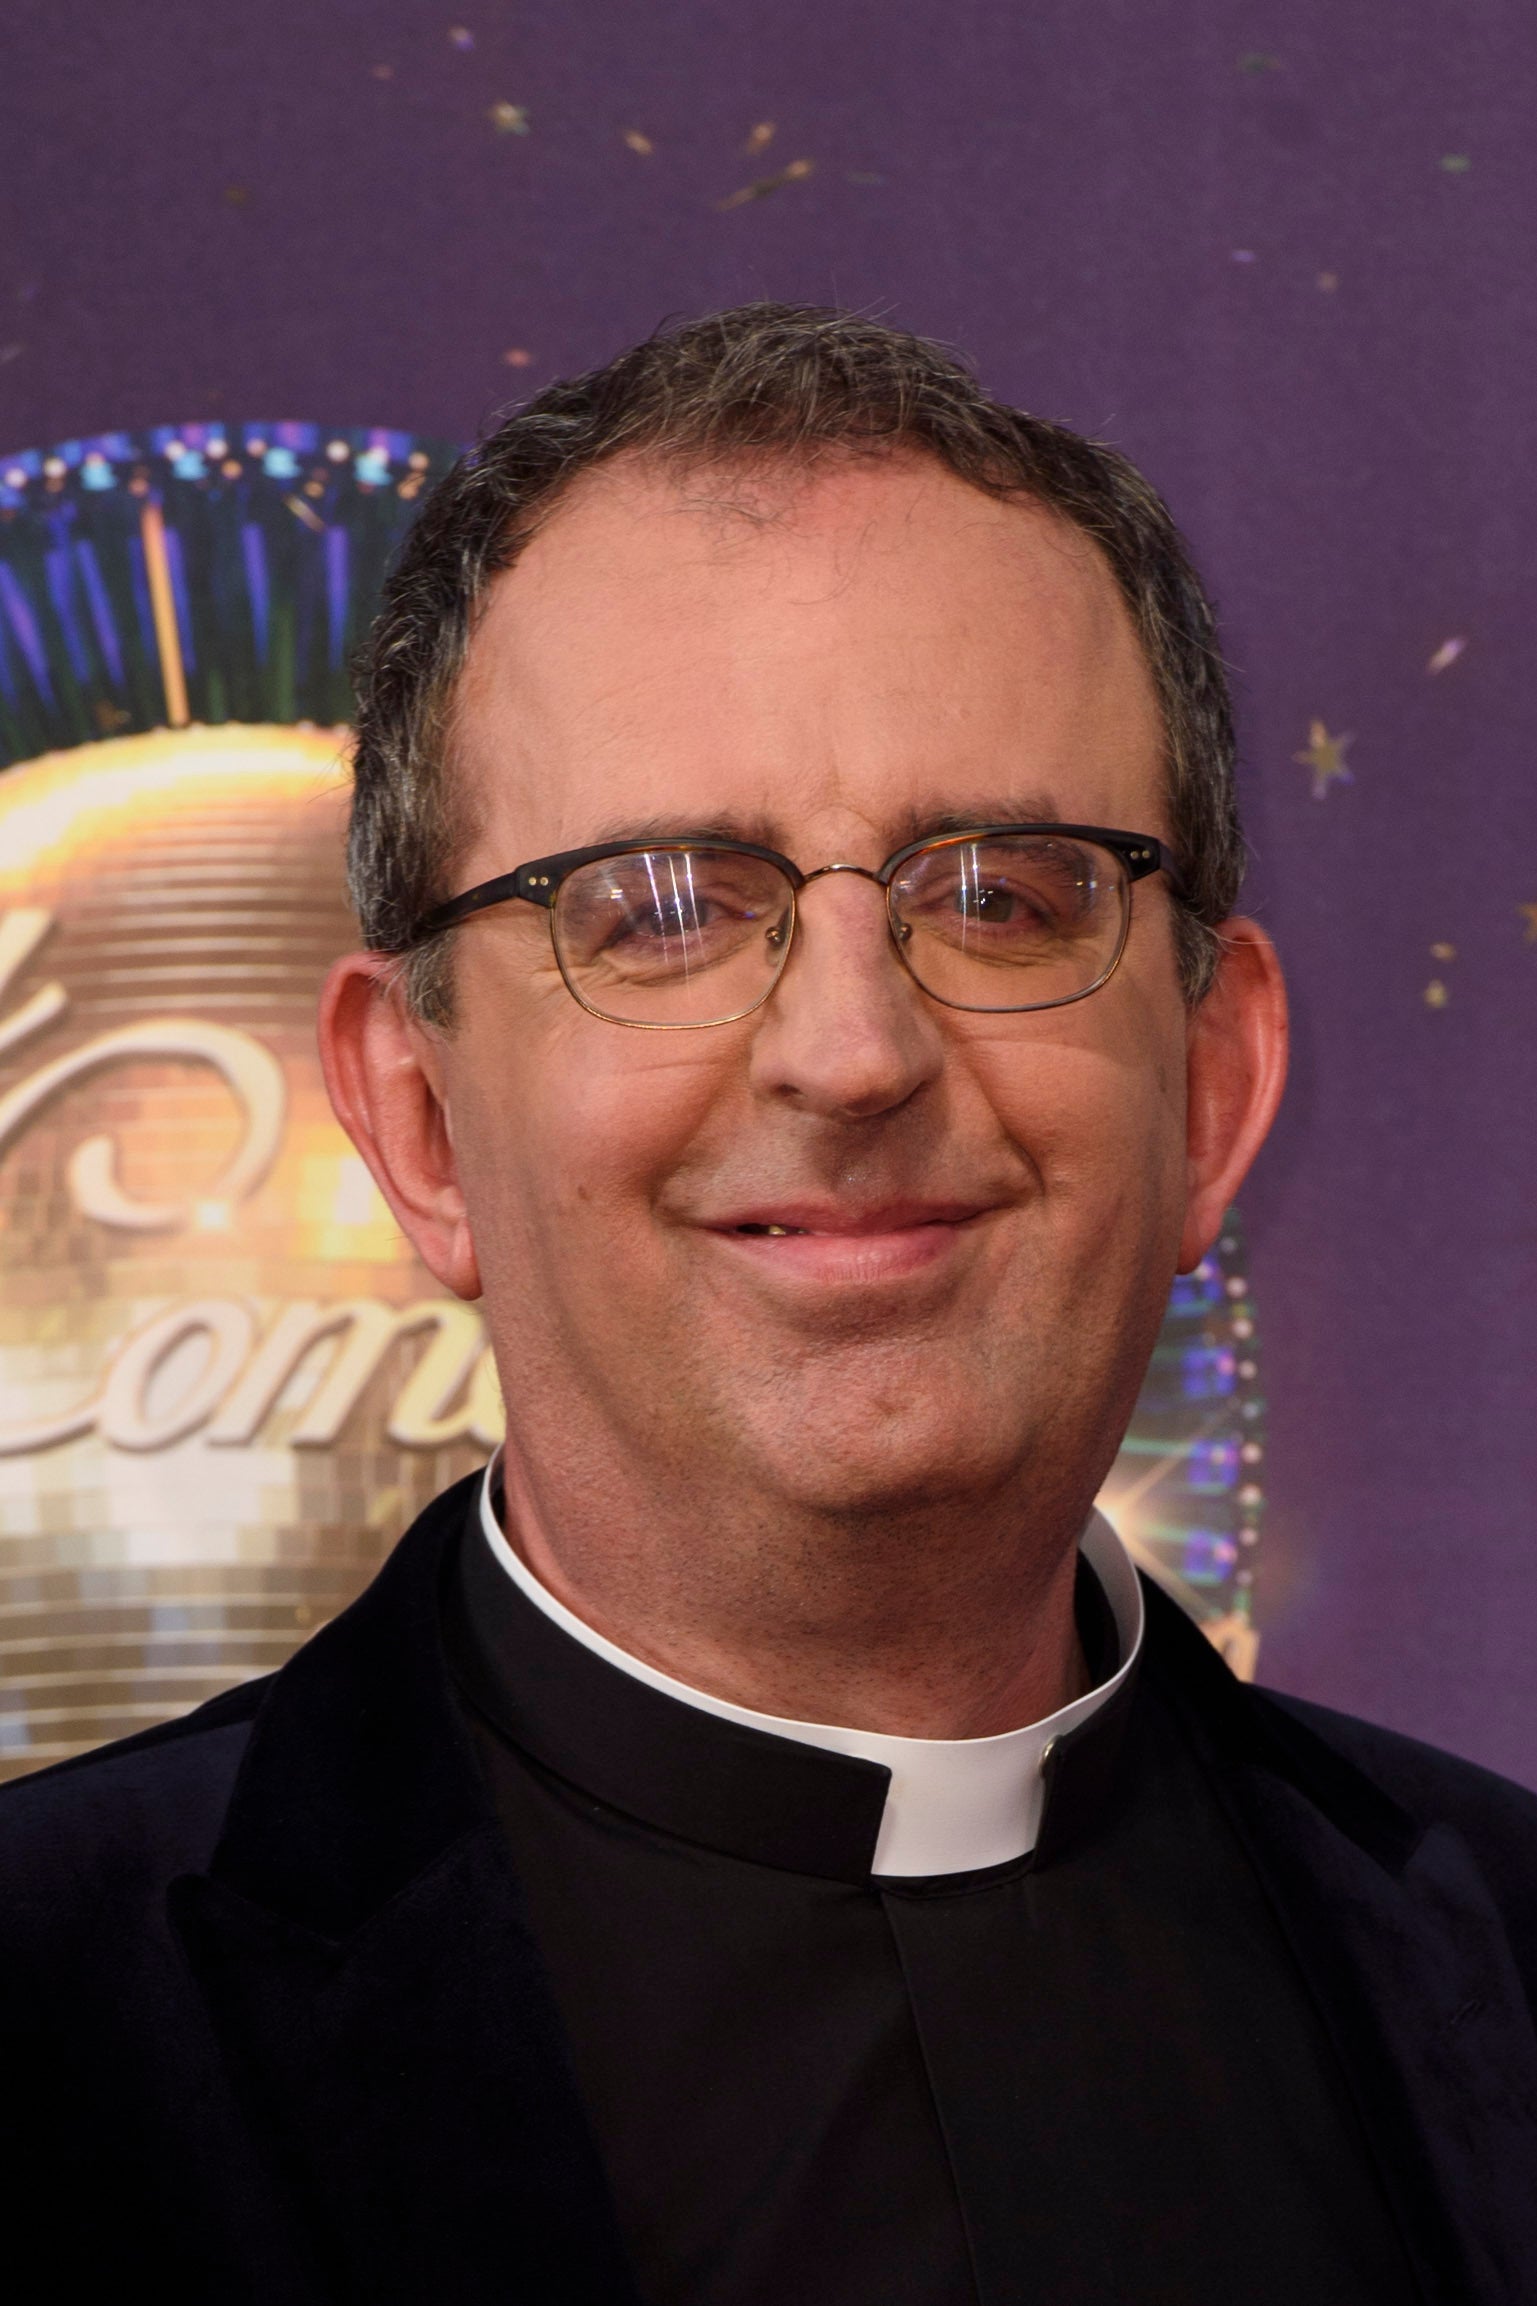 Reverend Richard Coles has said it is ‘frustrating’ that the Church of England is resisting giving the LGBT community equal status (Matt Crossick/PA)